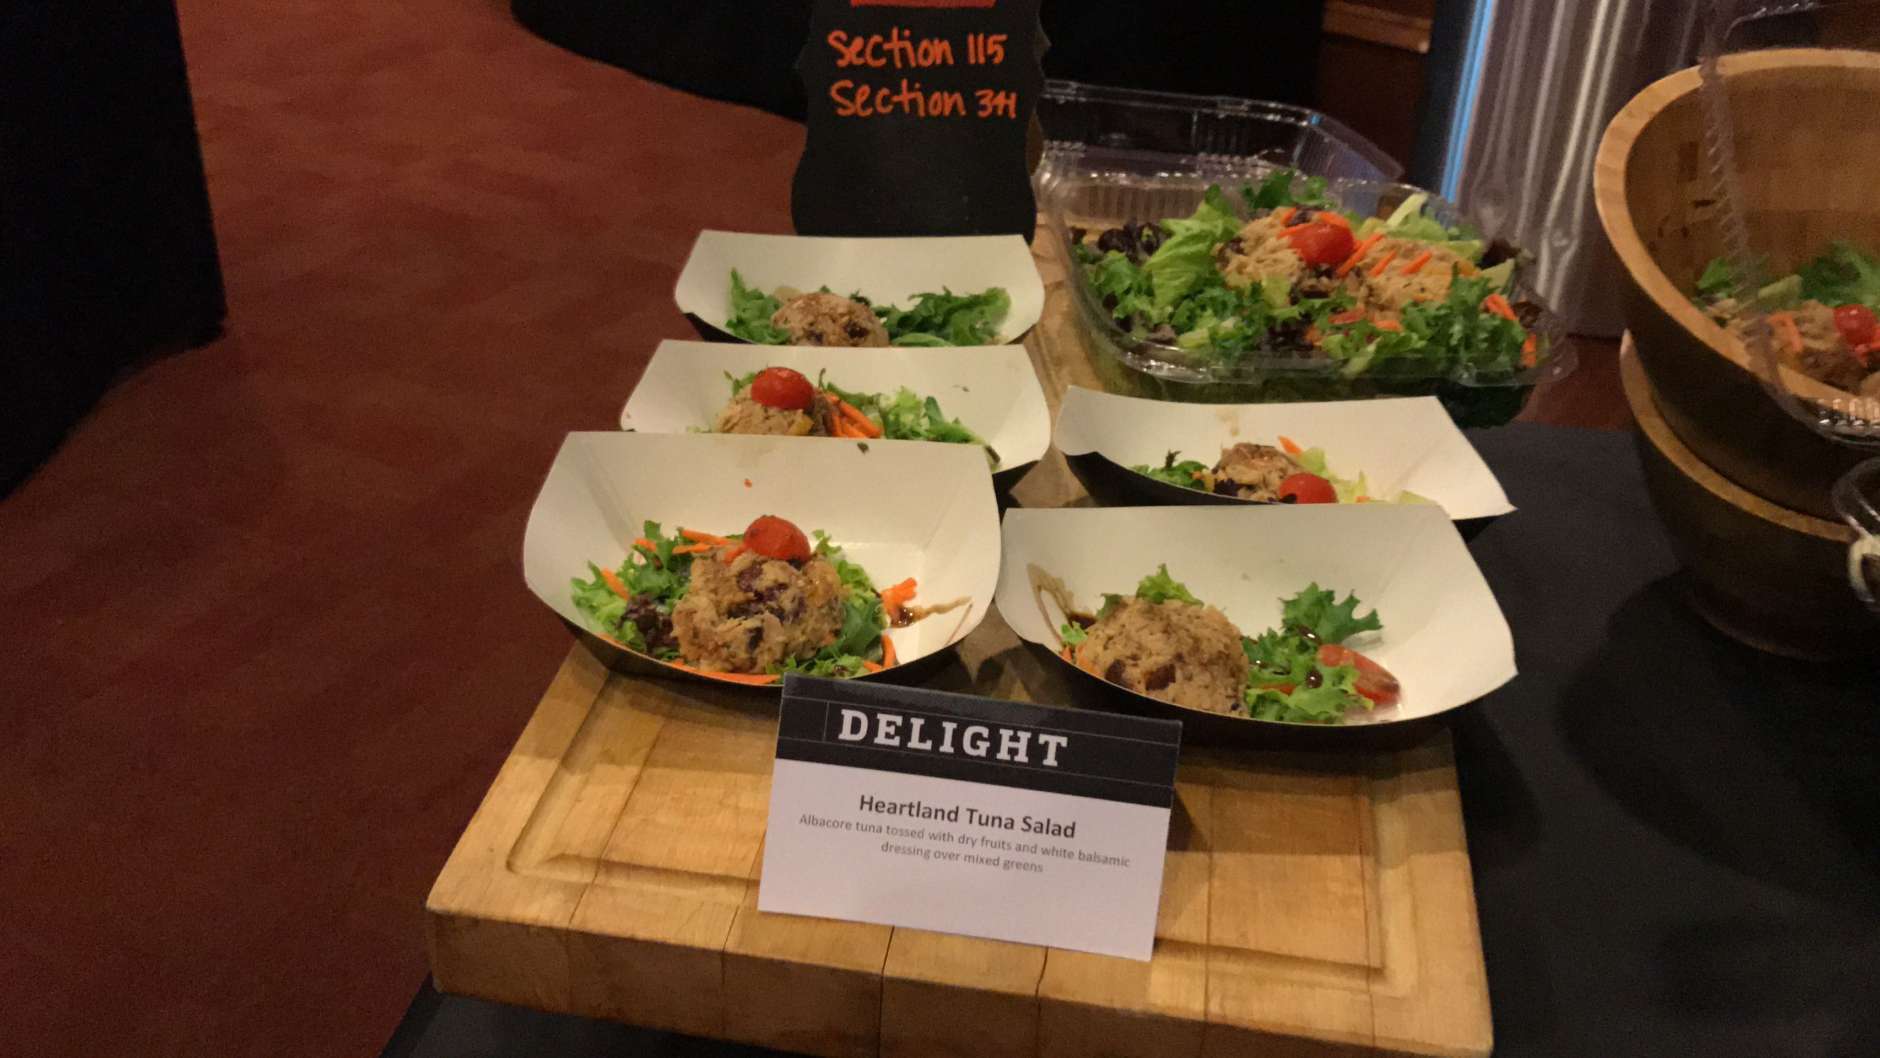 Healthier menu options include the Caprese Chop Salad and the Heartland Tuna Salad. (WTOP/Ginger Whitaker)